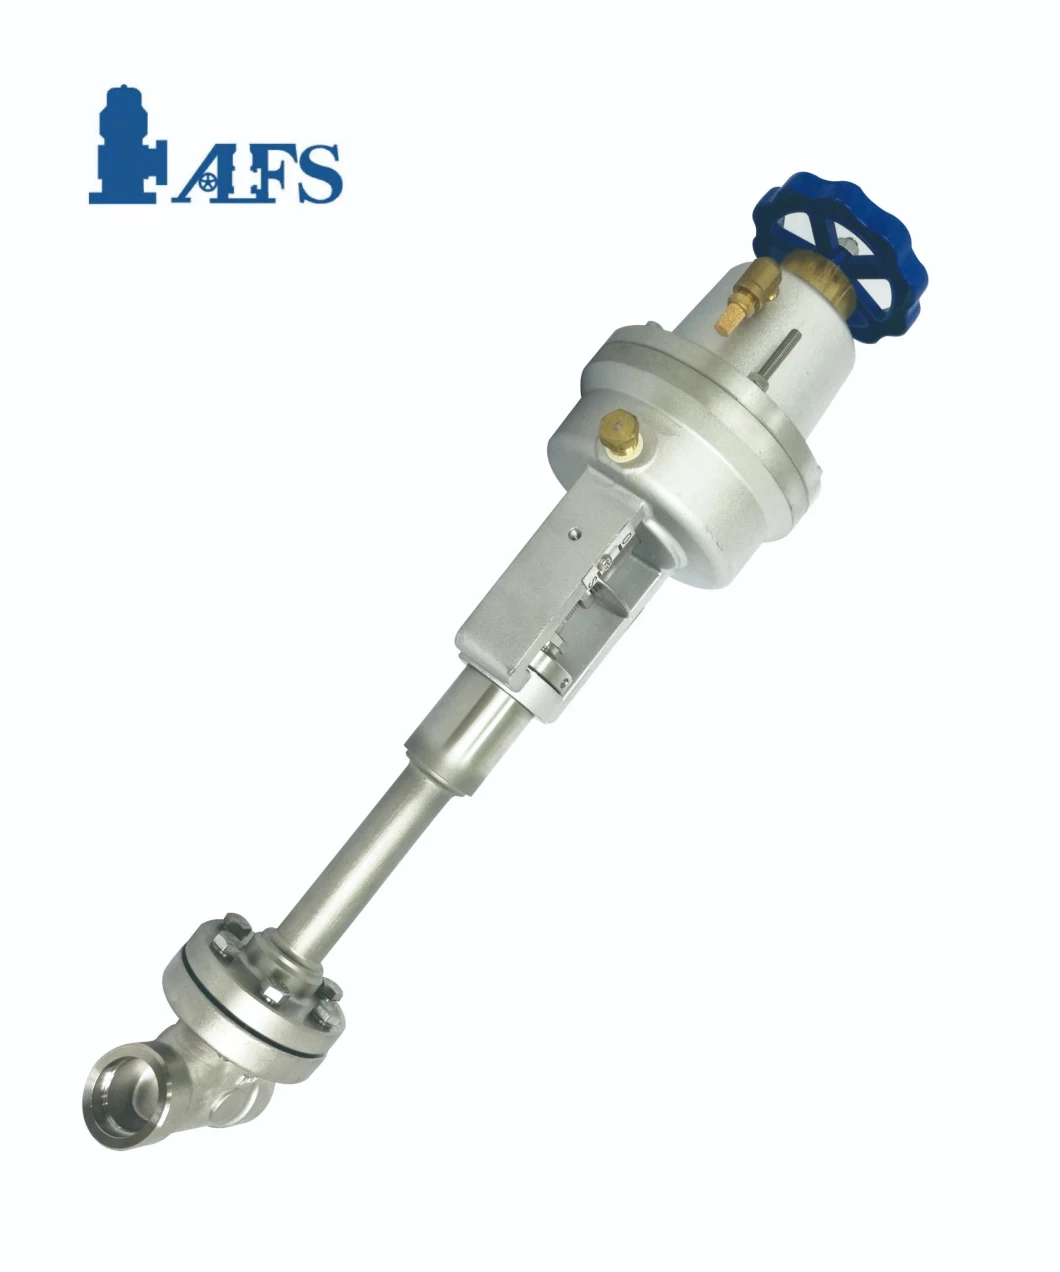 Low Temperature Valves /Material Size Can Be Customized/ Globe Valve/Ball Valve/Shut off Valve